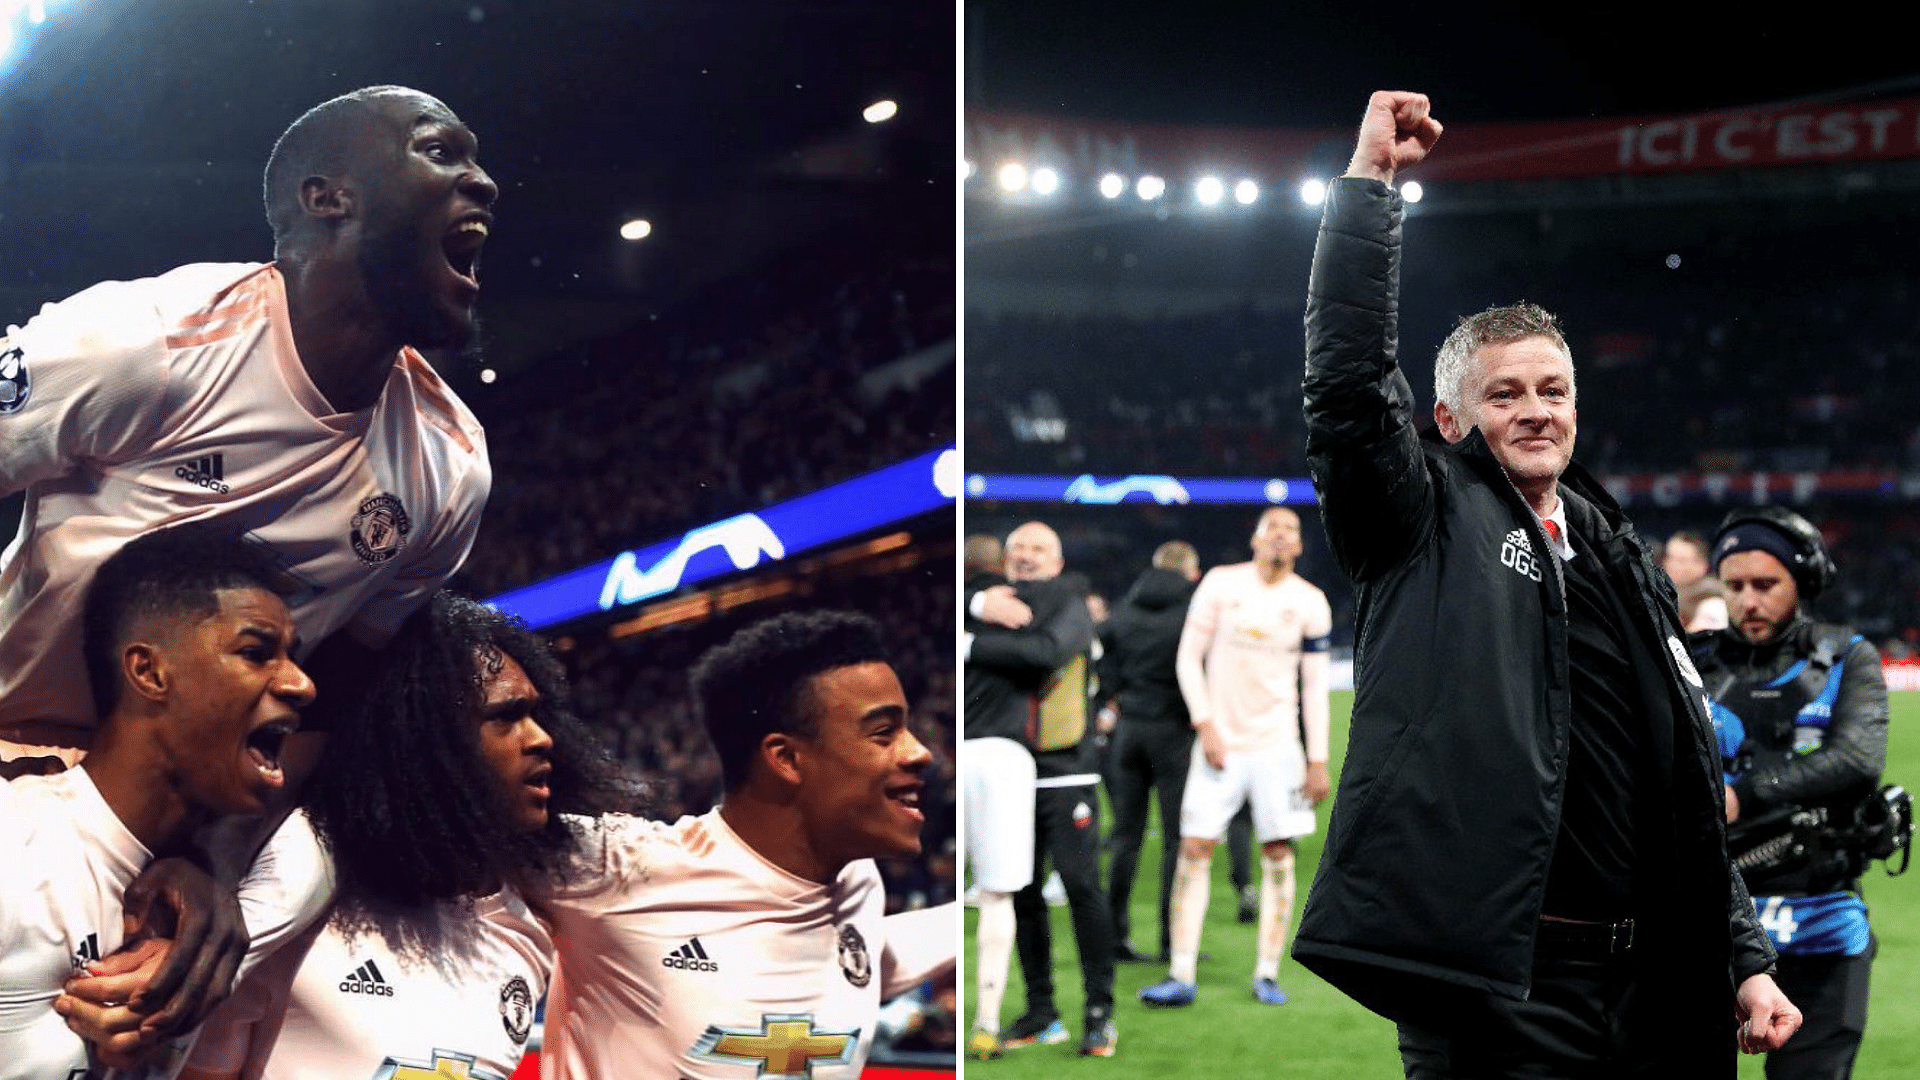 Manchester United overturned a 0-2 first leg deficit with a 3-1 victory at PSG to miraculously progress from their Champions League round of 16 tie.